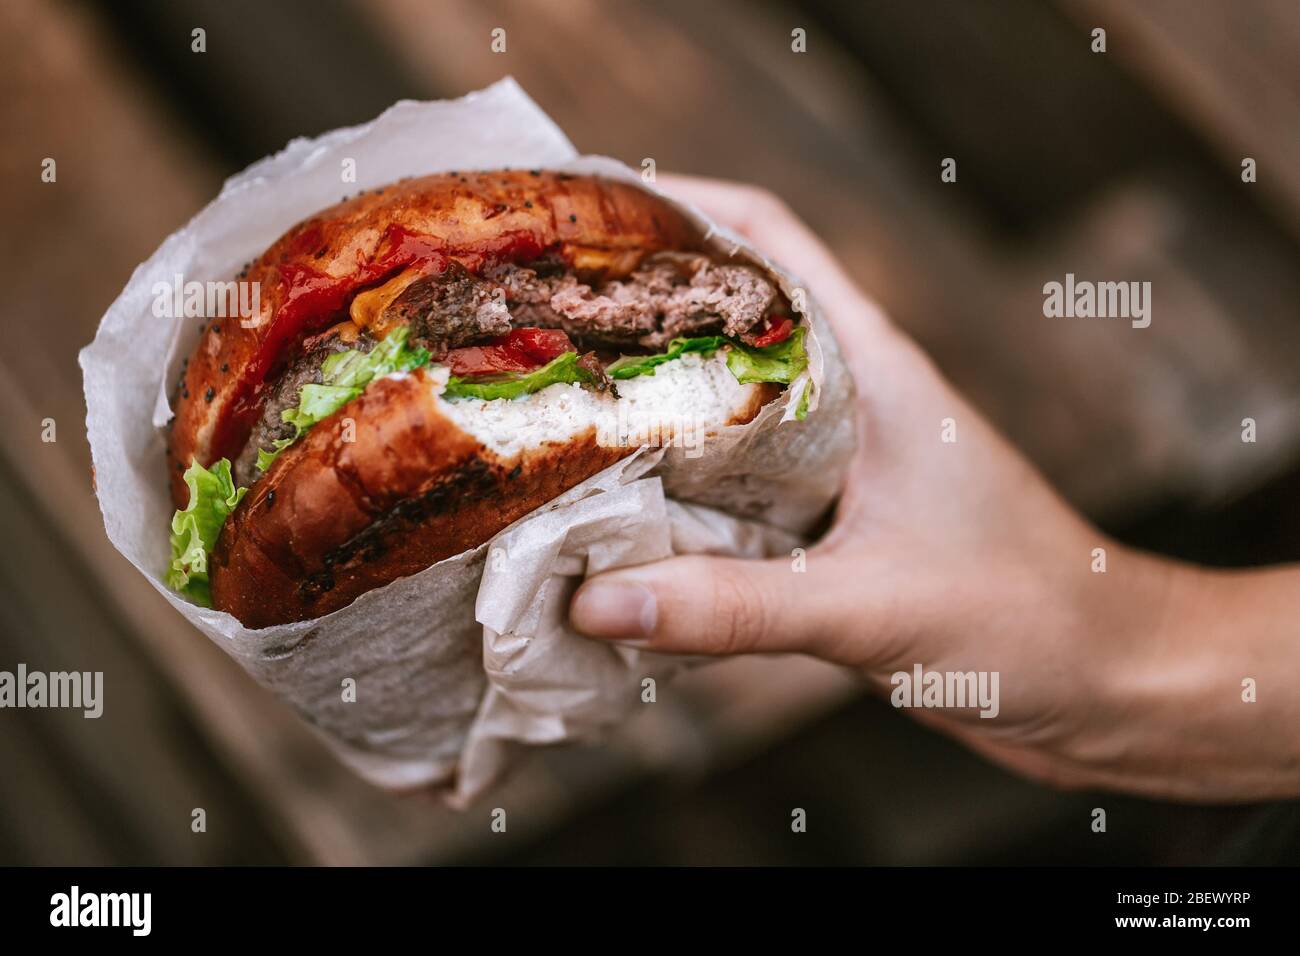 Hand holding a juicy burger. Hamburger in hand. Shallow depth of field Stock Photo